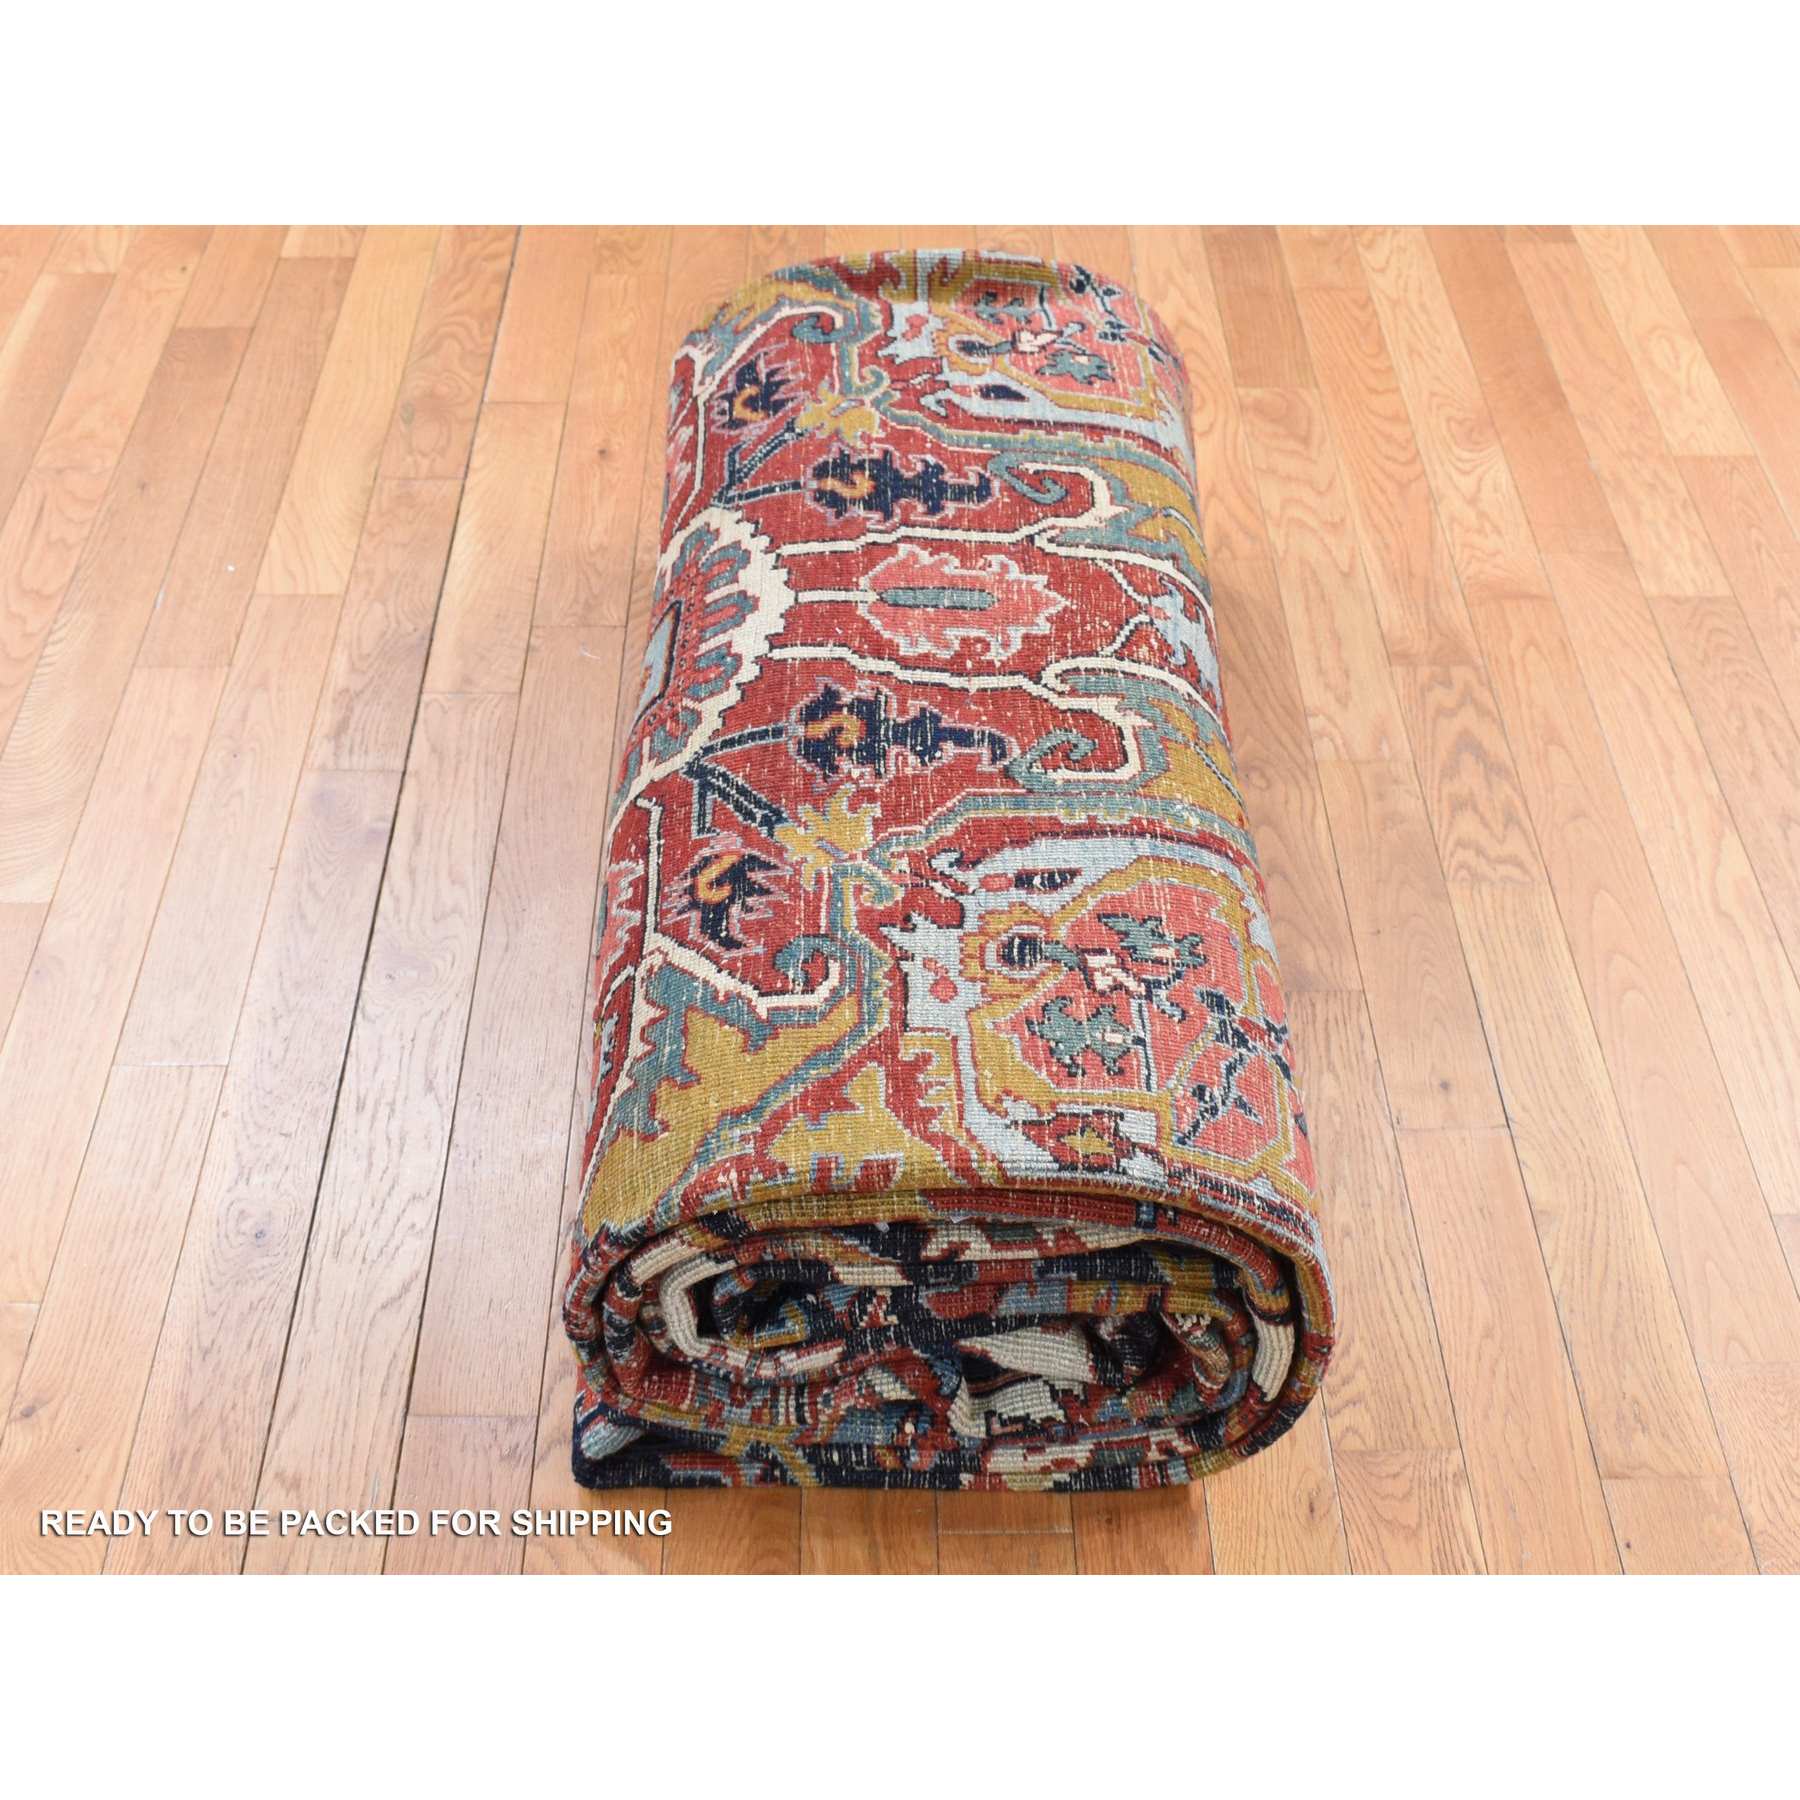 Antique-Hand-Knotted-Rug-403510